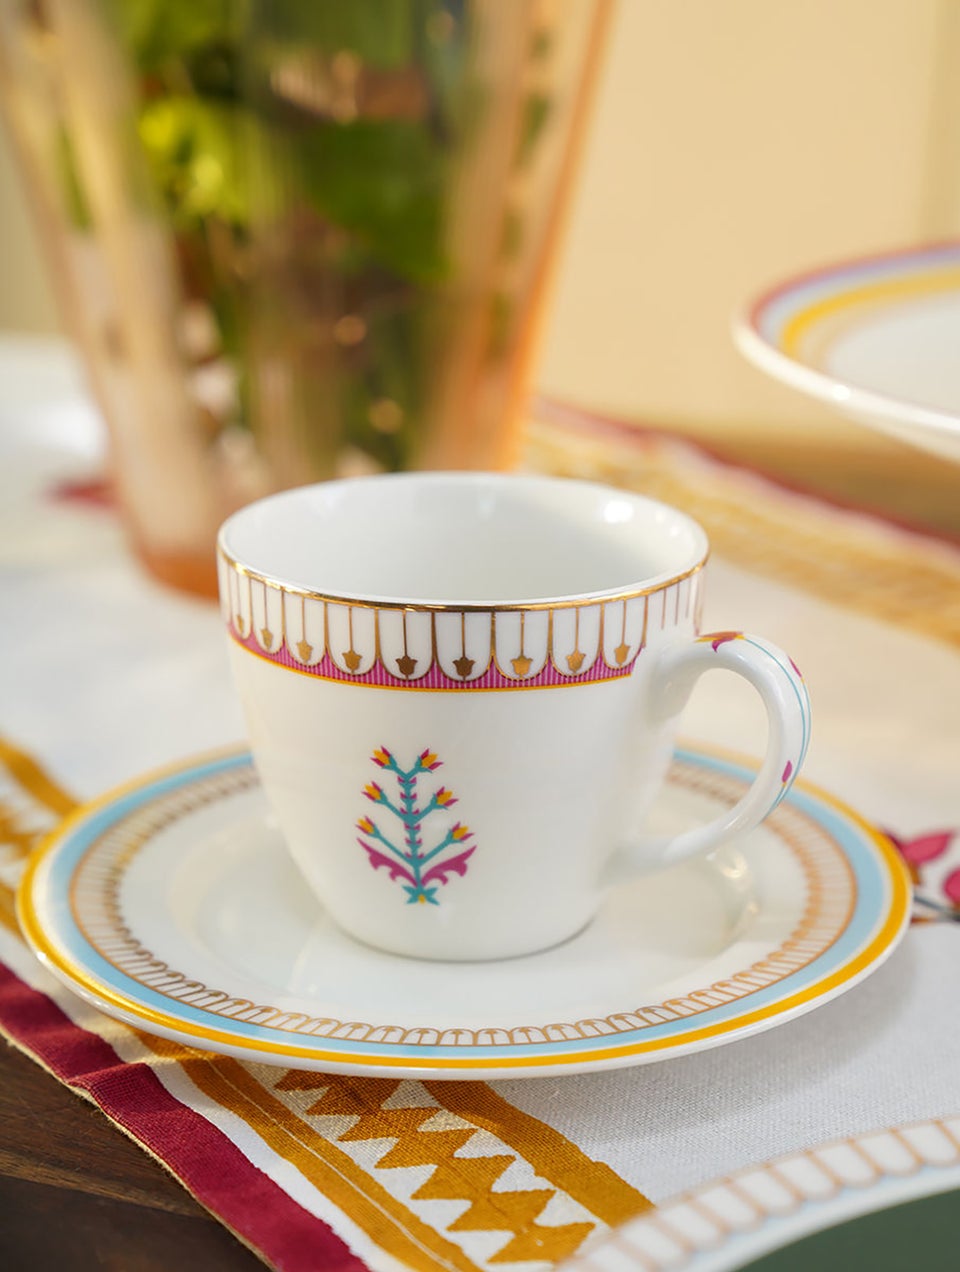 Handcrafted Porcelain Paithan Tea Cups With 24 Karat Gold Work In A Gift Box